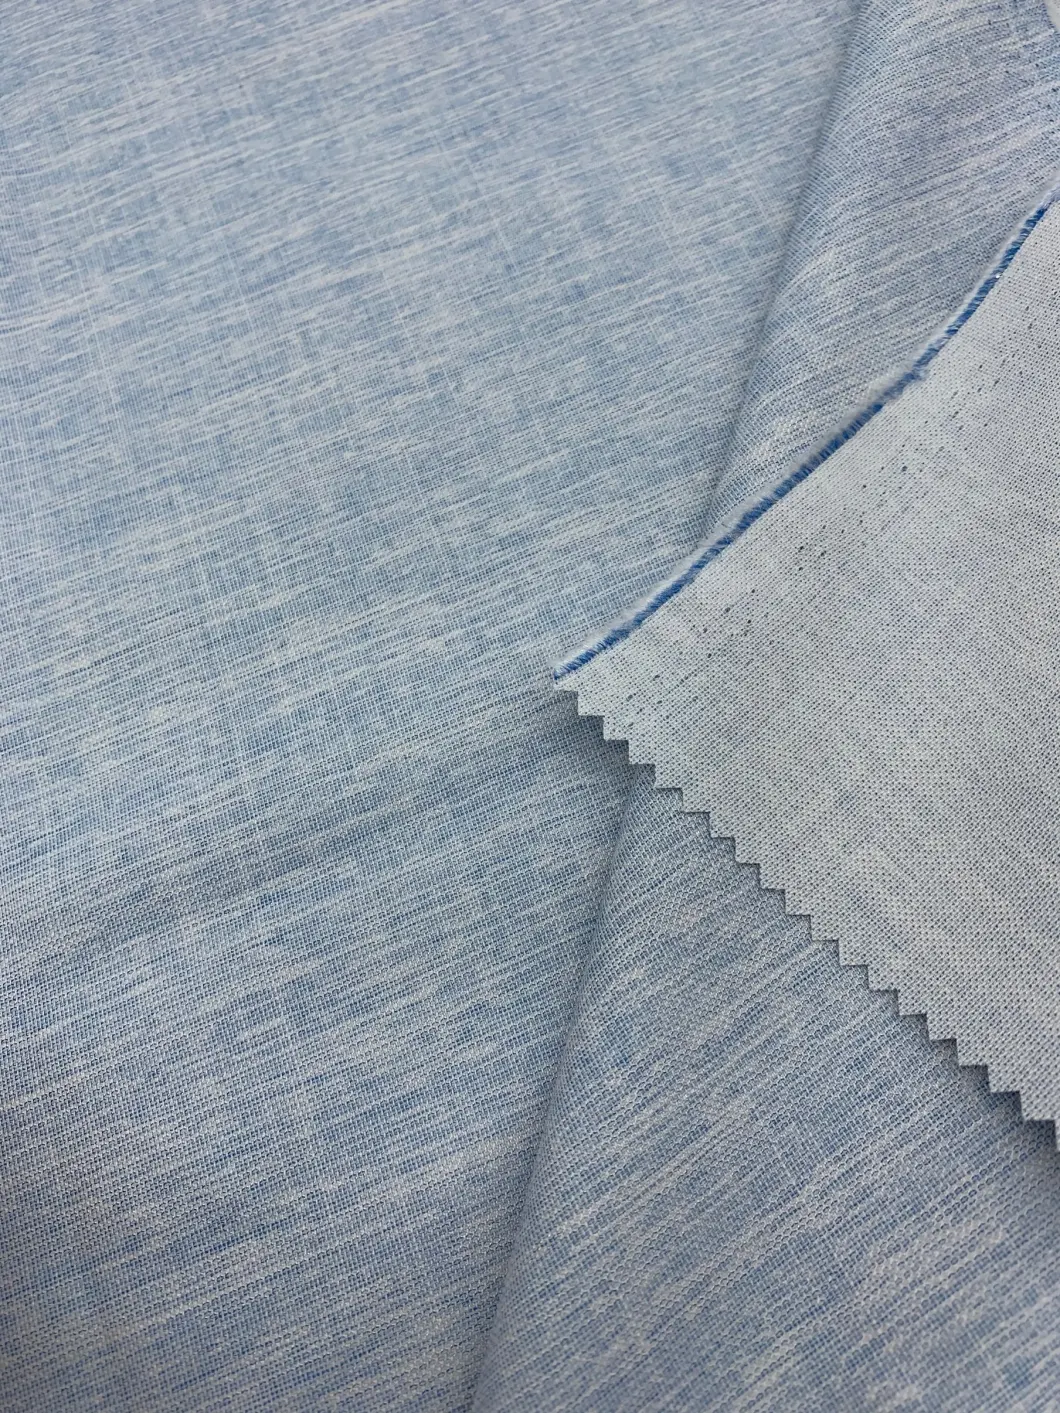 Quilted 100% Polyester Custom Print Woven Twill Lining Taffeta Fabric for Suit Lining in Fine Twill